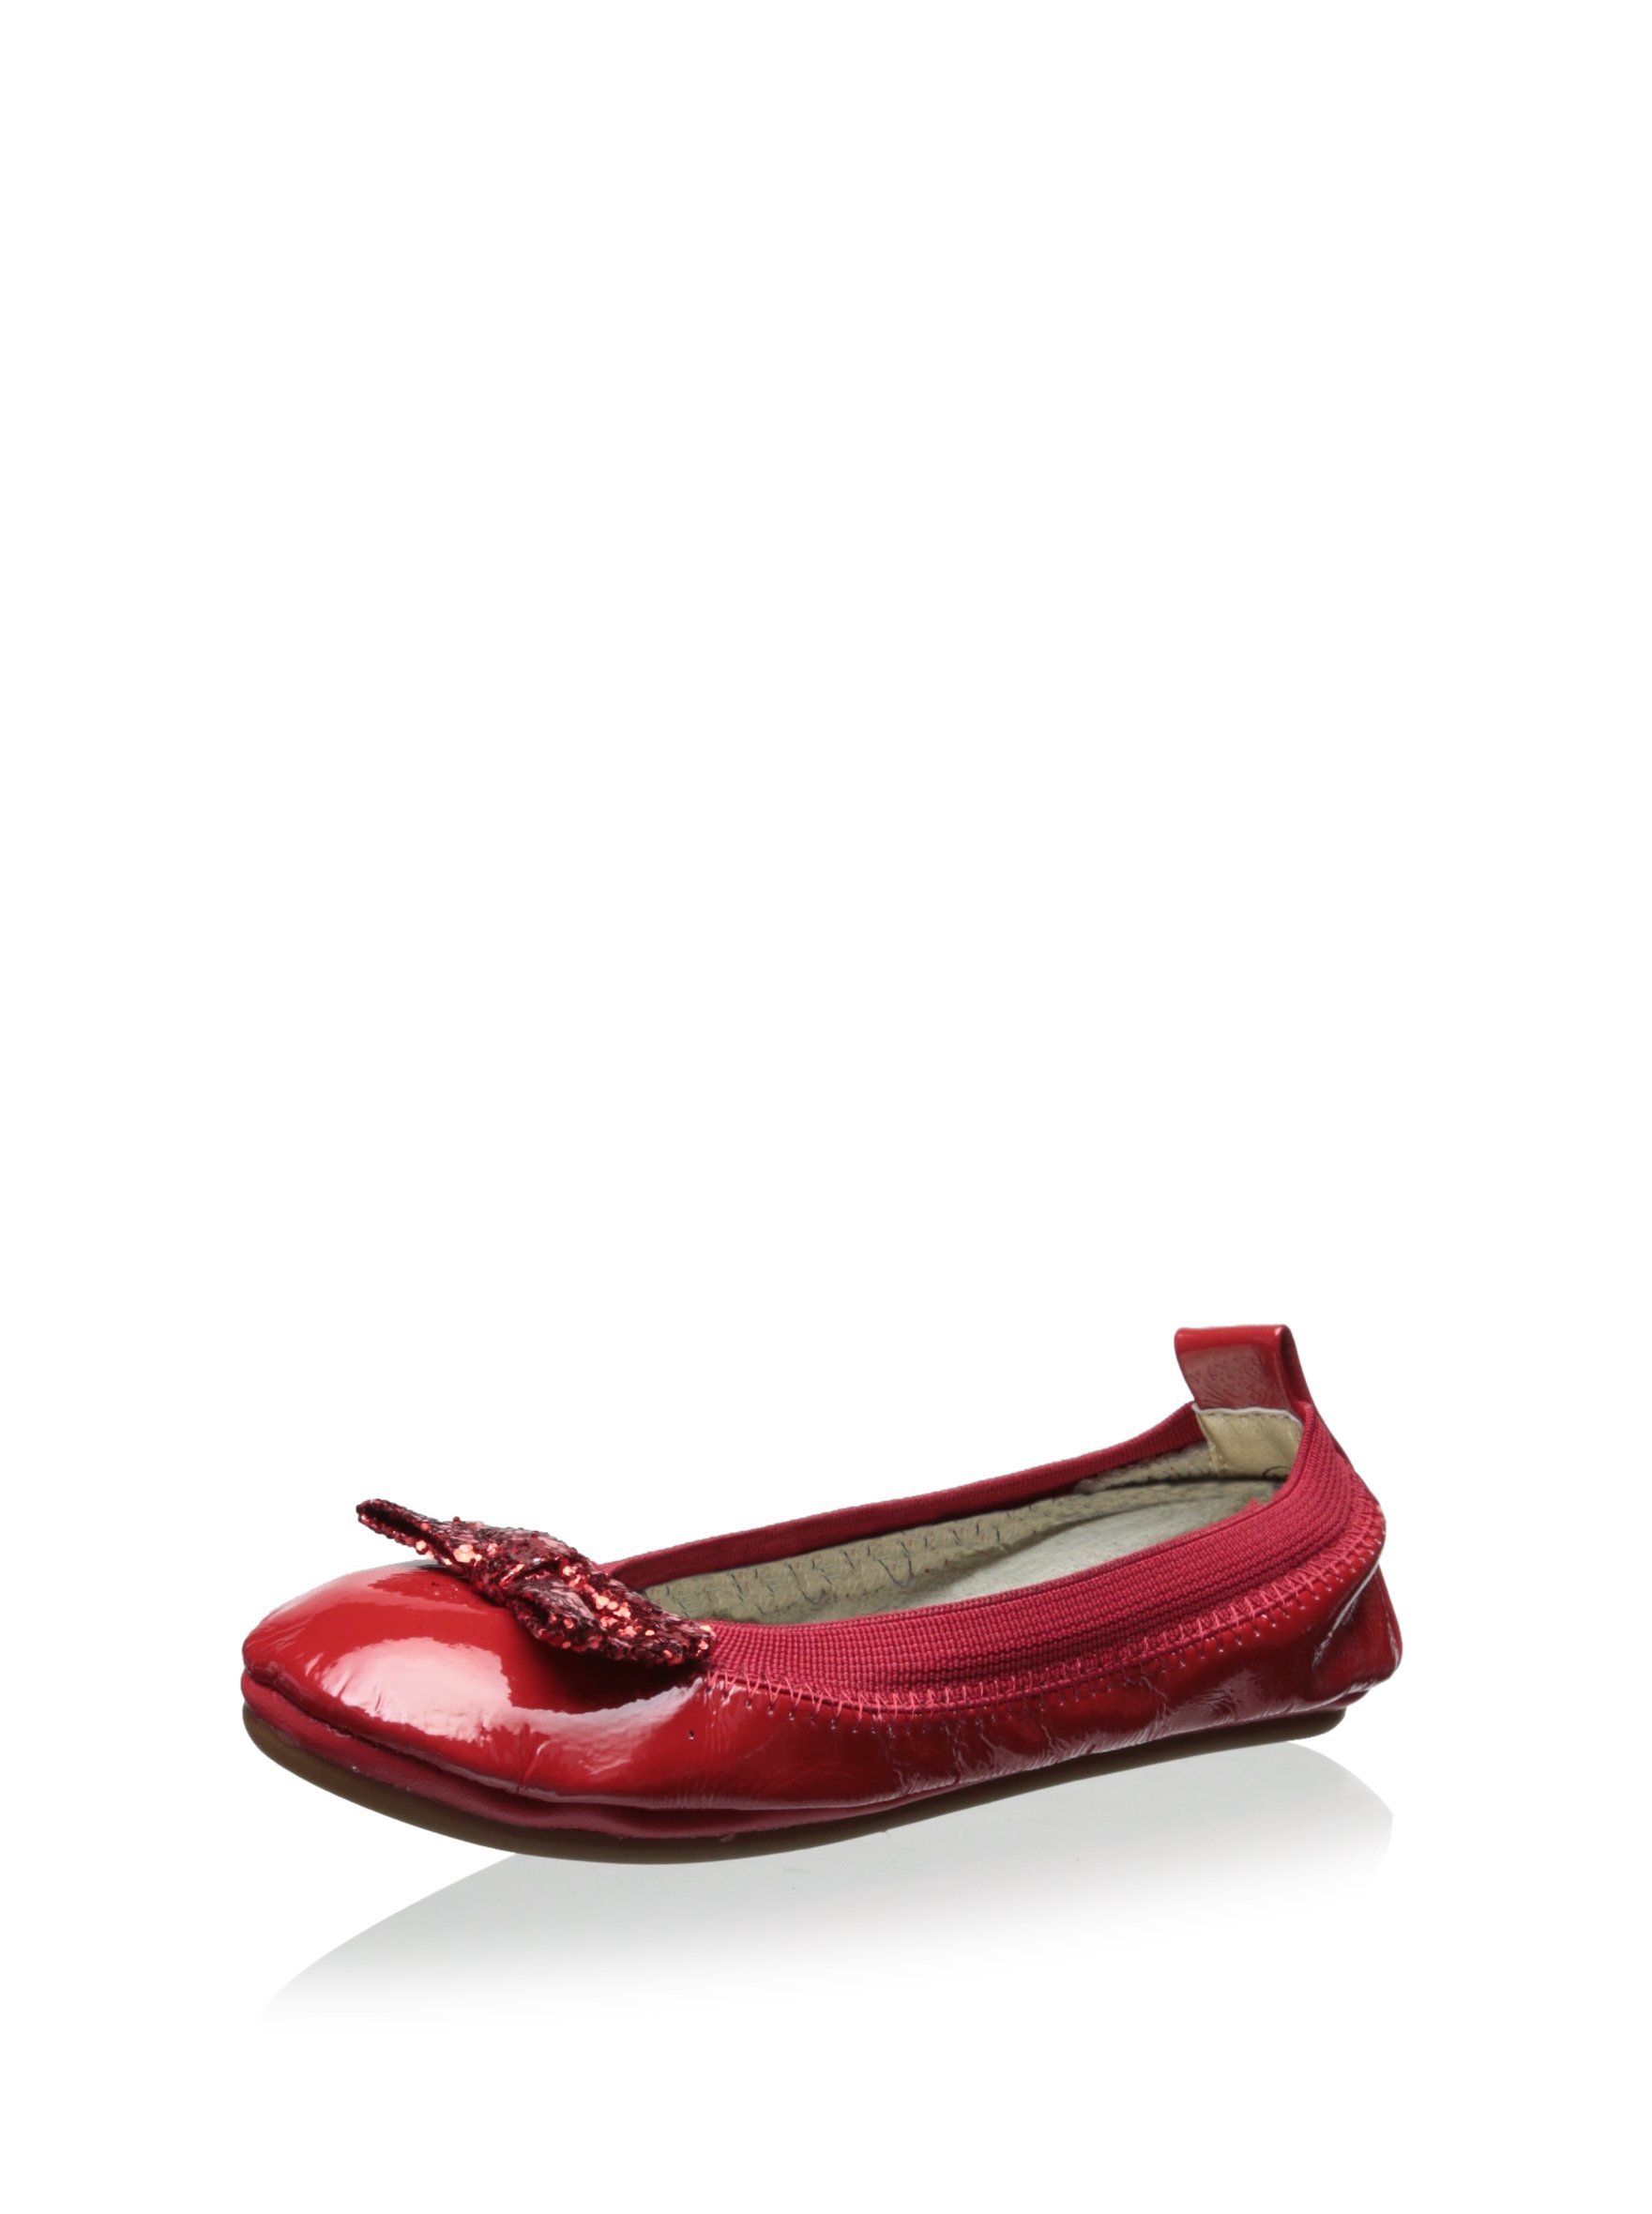 Yosi Samra Patent Leather Bendable Ballet Flat with Red Chunky Glitter Bow 6C/Infant - image 1 of 1